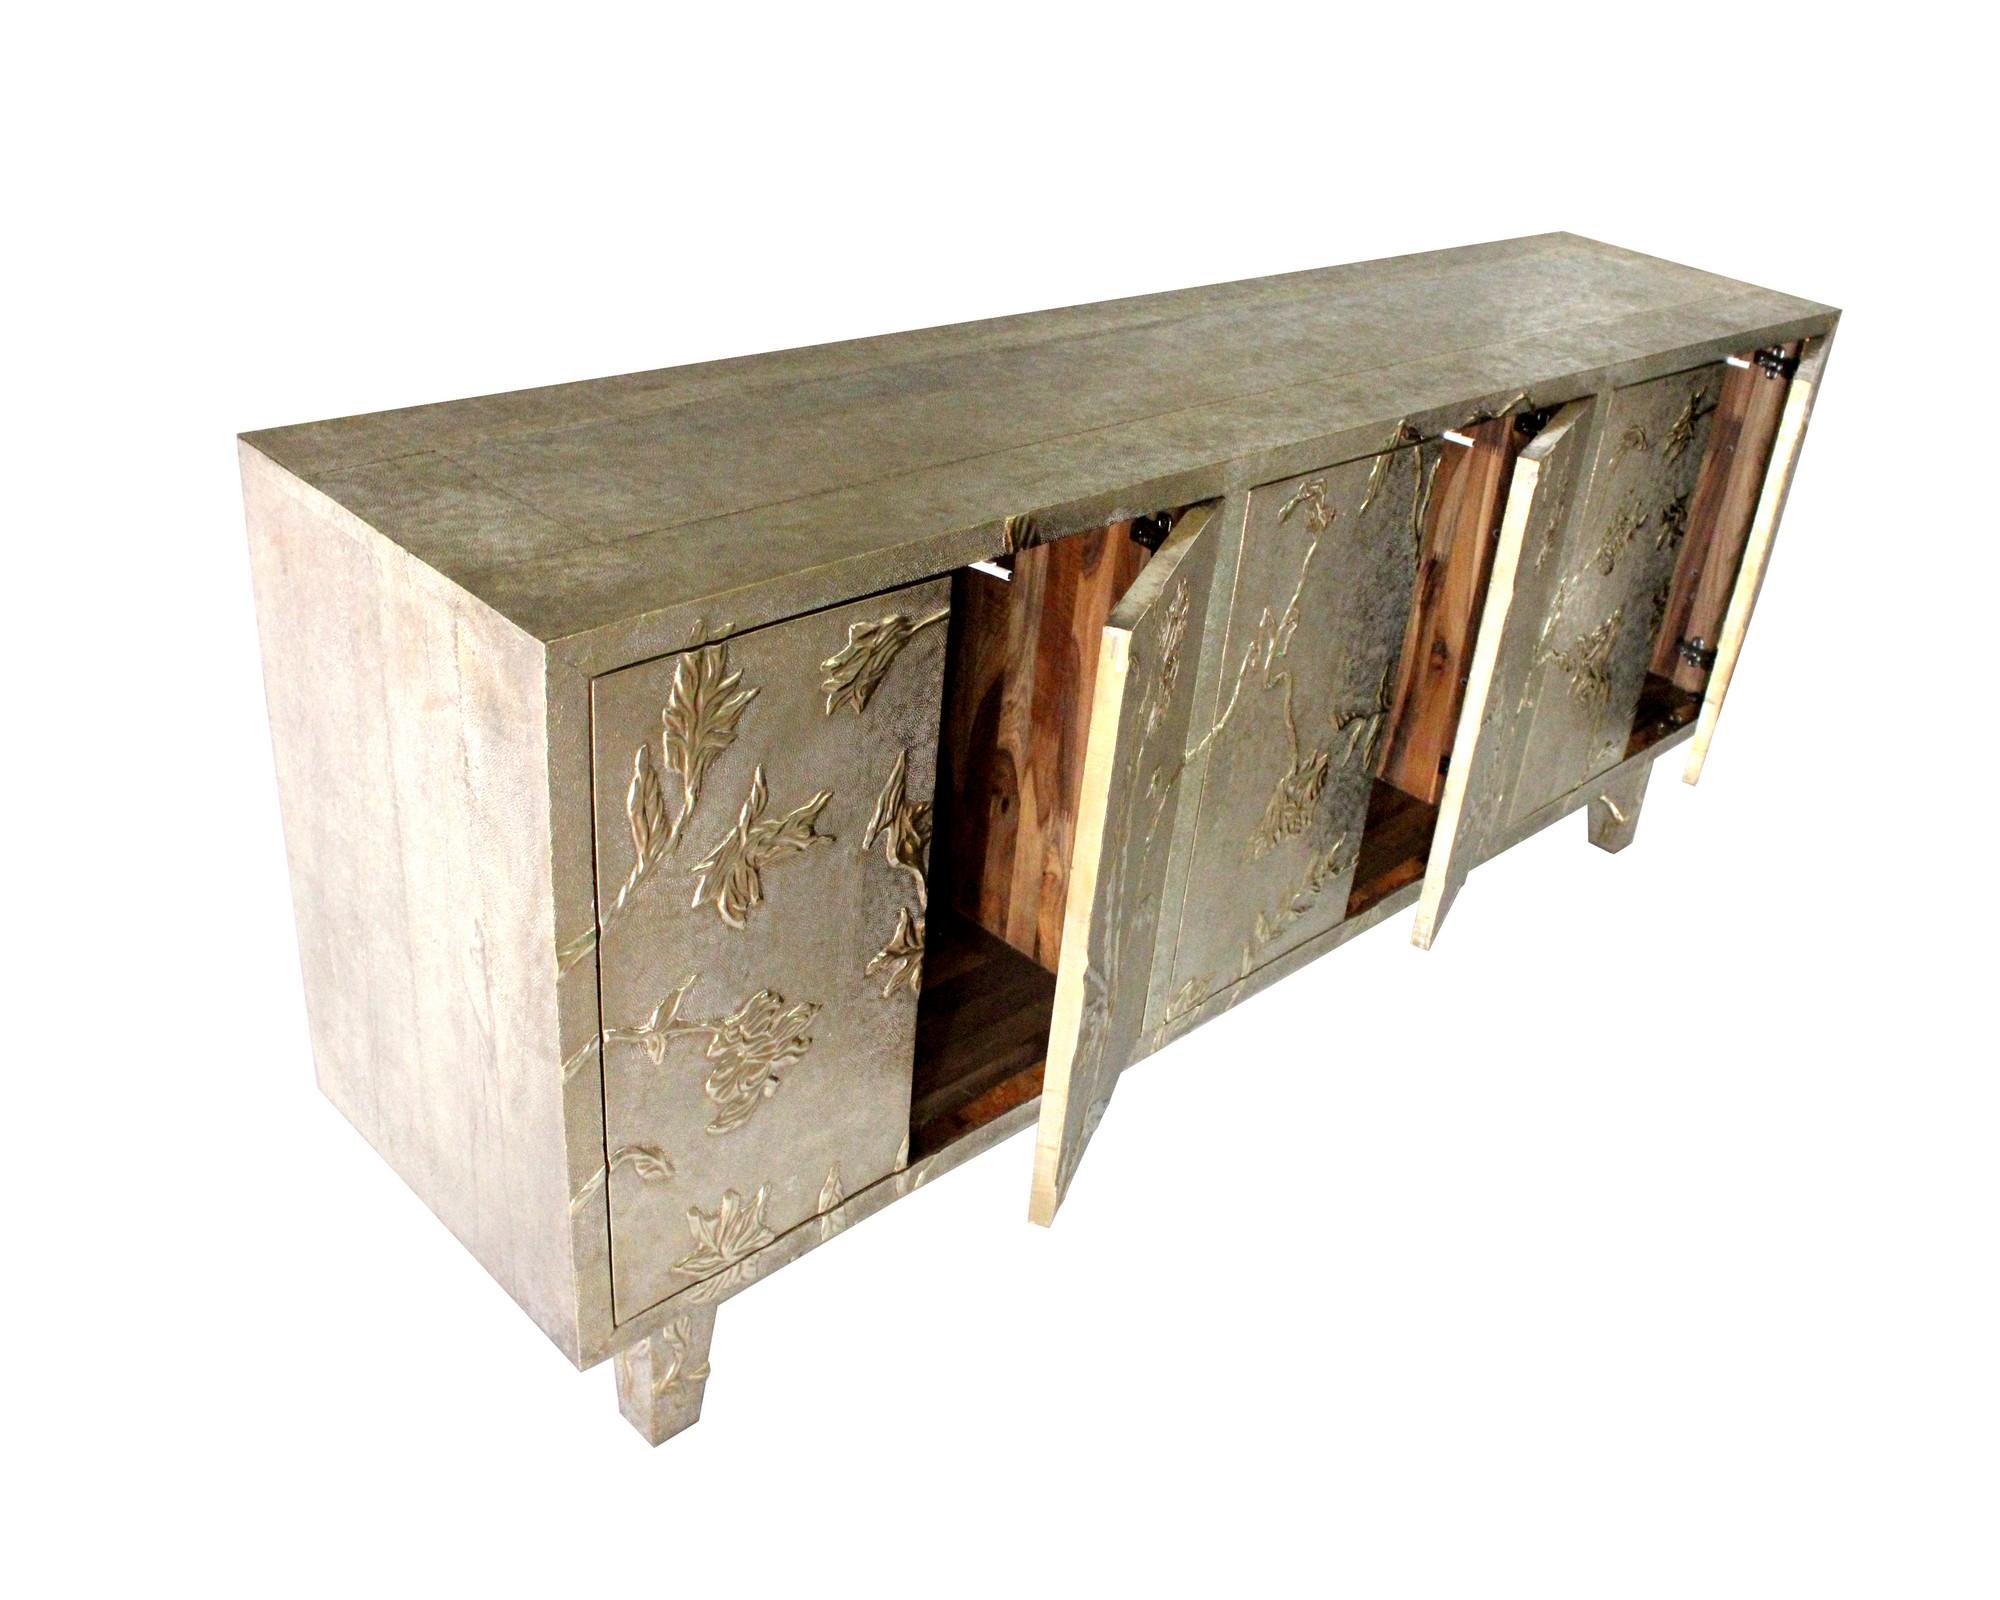 Indian Modern Credenza Sideboard in Floral Brass Clad, Handmade in India by S. Odegard For Sale